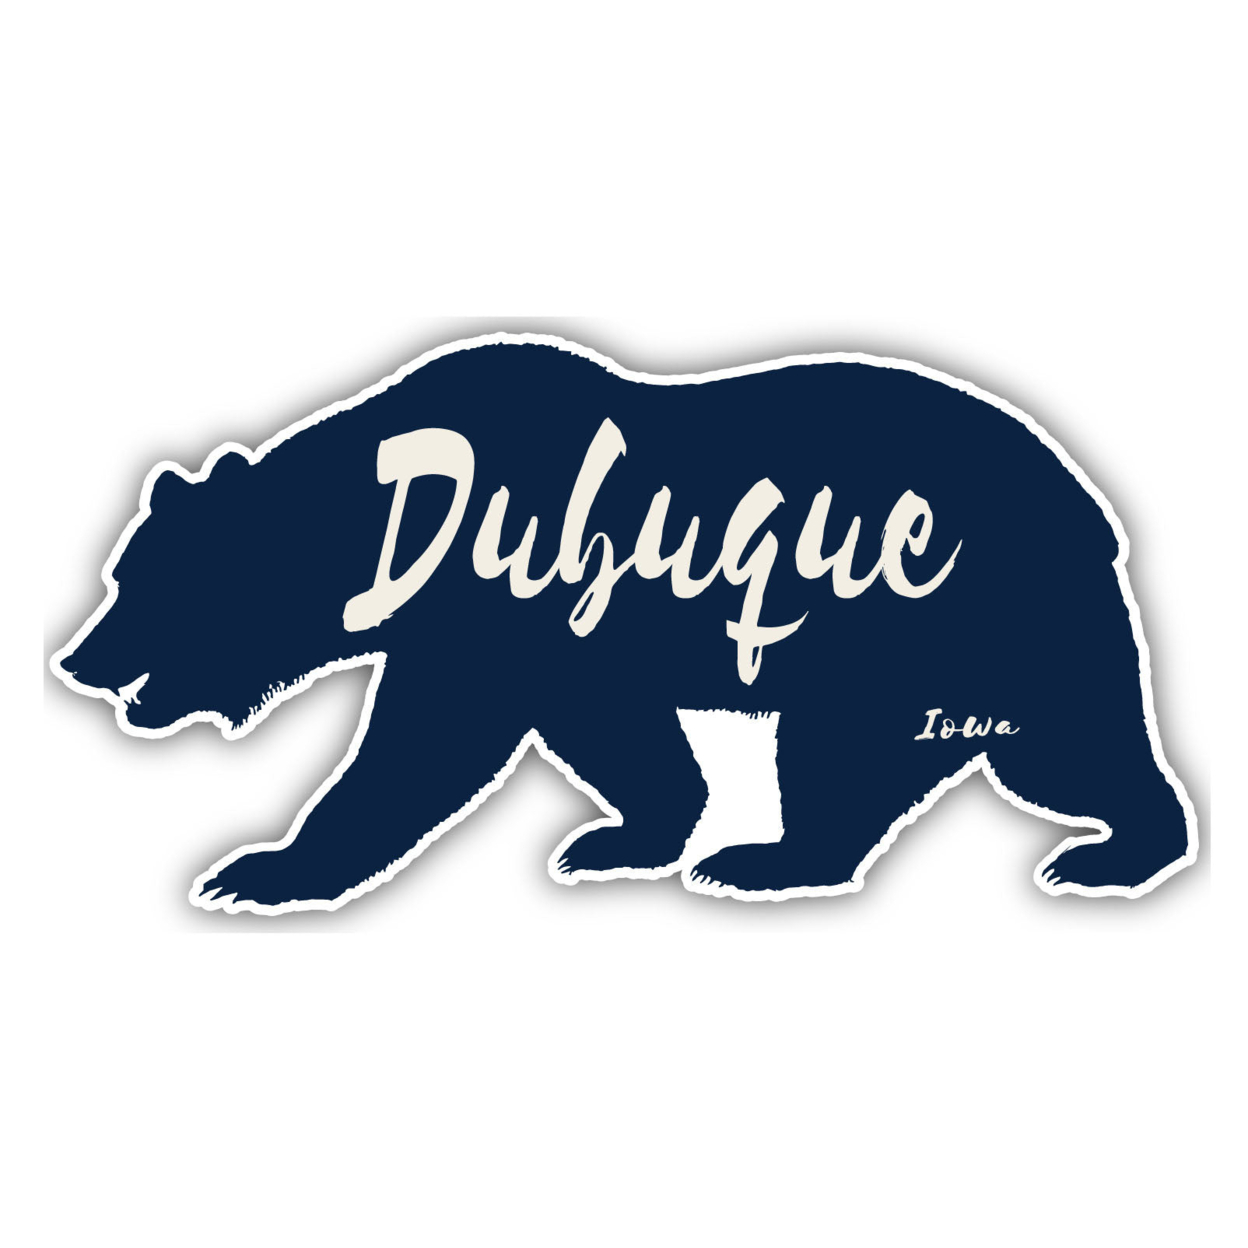 Dubuque Iowa Souvenir Decorative Stickers (Choose Theme And Size) - 4-Pack, 8-Inch, Great Outdoors